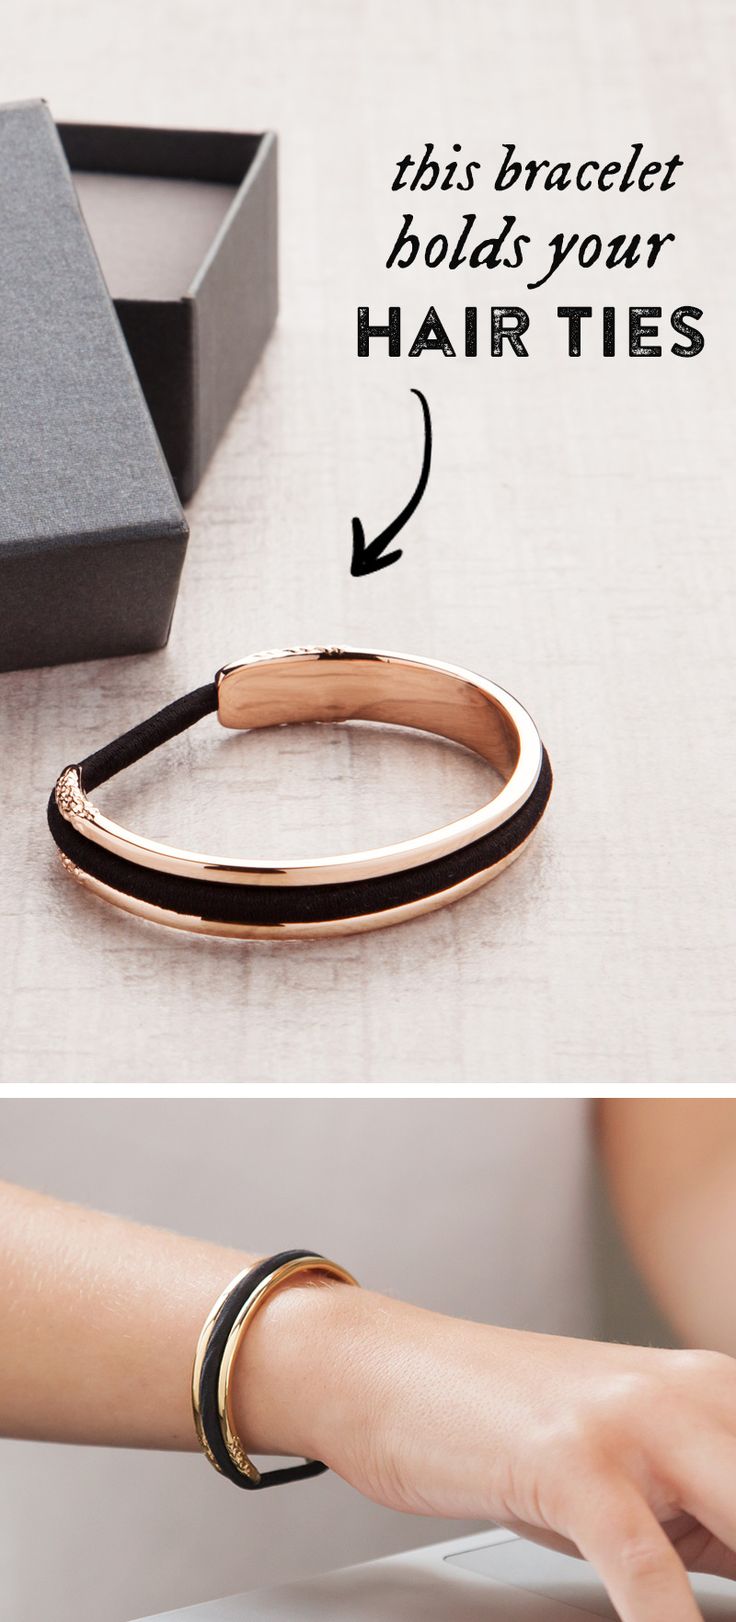 I NEED THIS IN MY LIFE. Carry a hair elastic on your wrist in a way that’s ele...